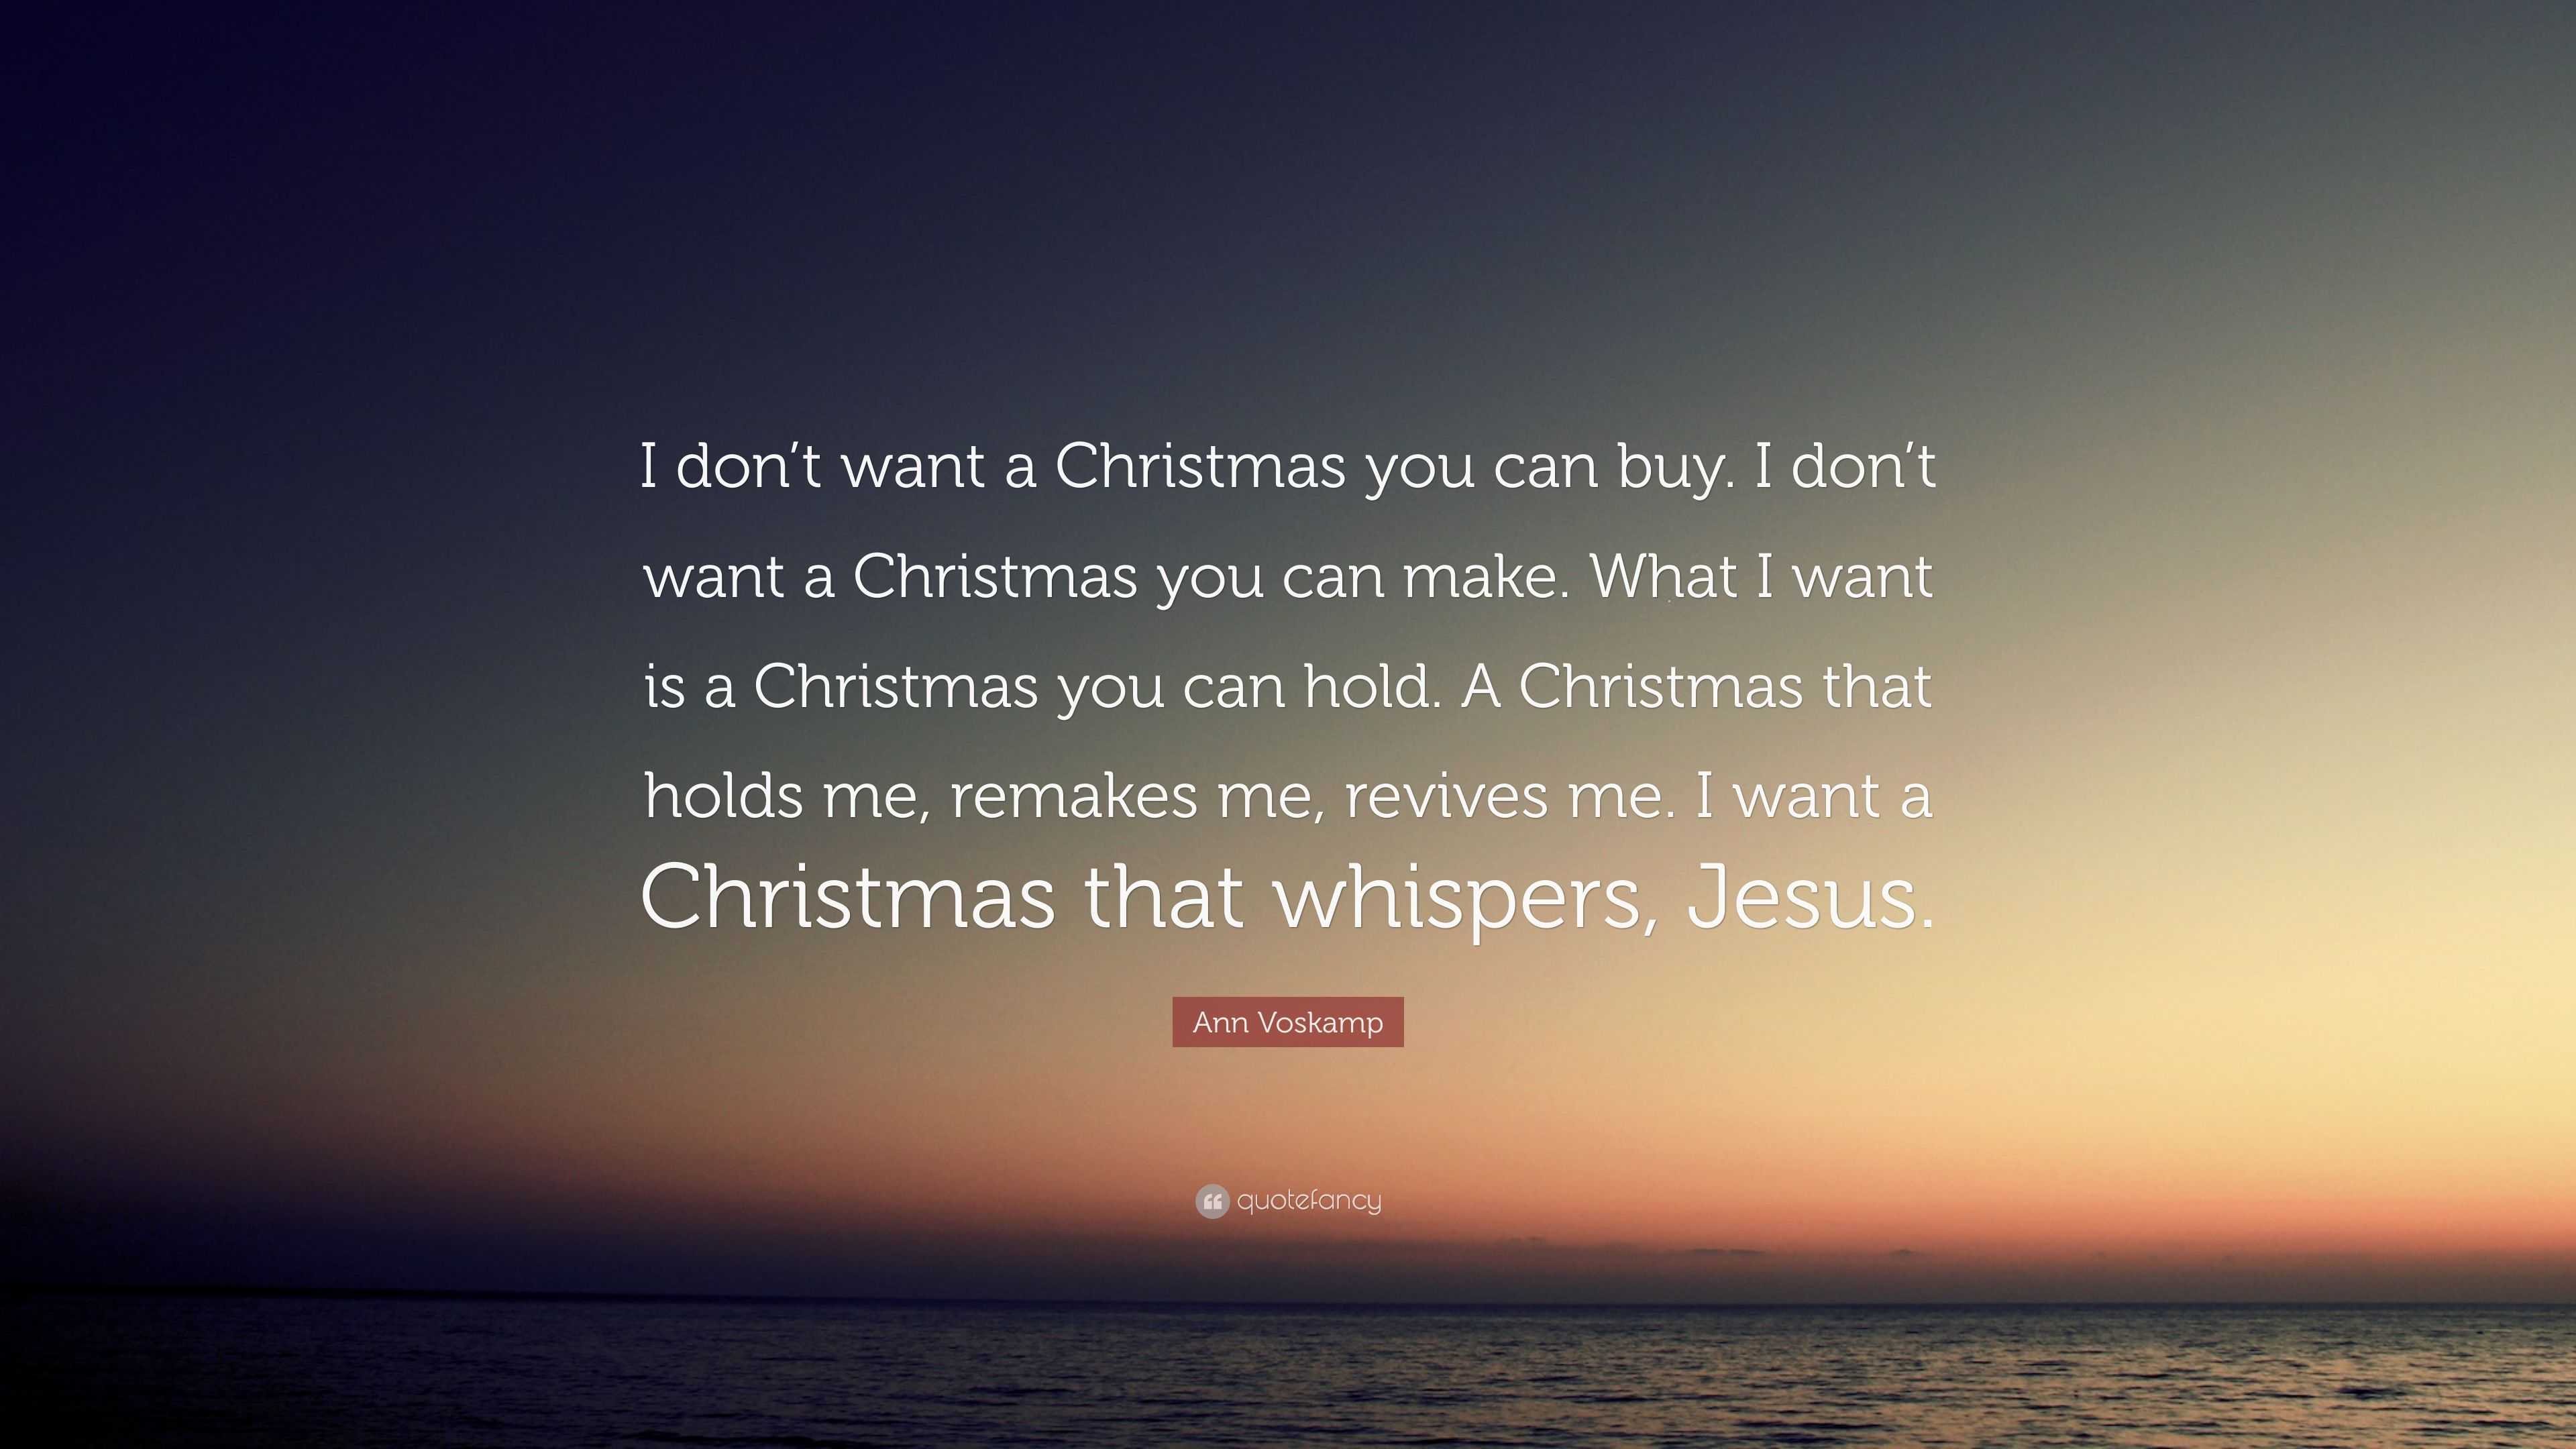 Ann Voskamp Quote: “I don’t want a Christmas you can buy. I don’t want ...